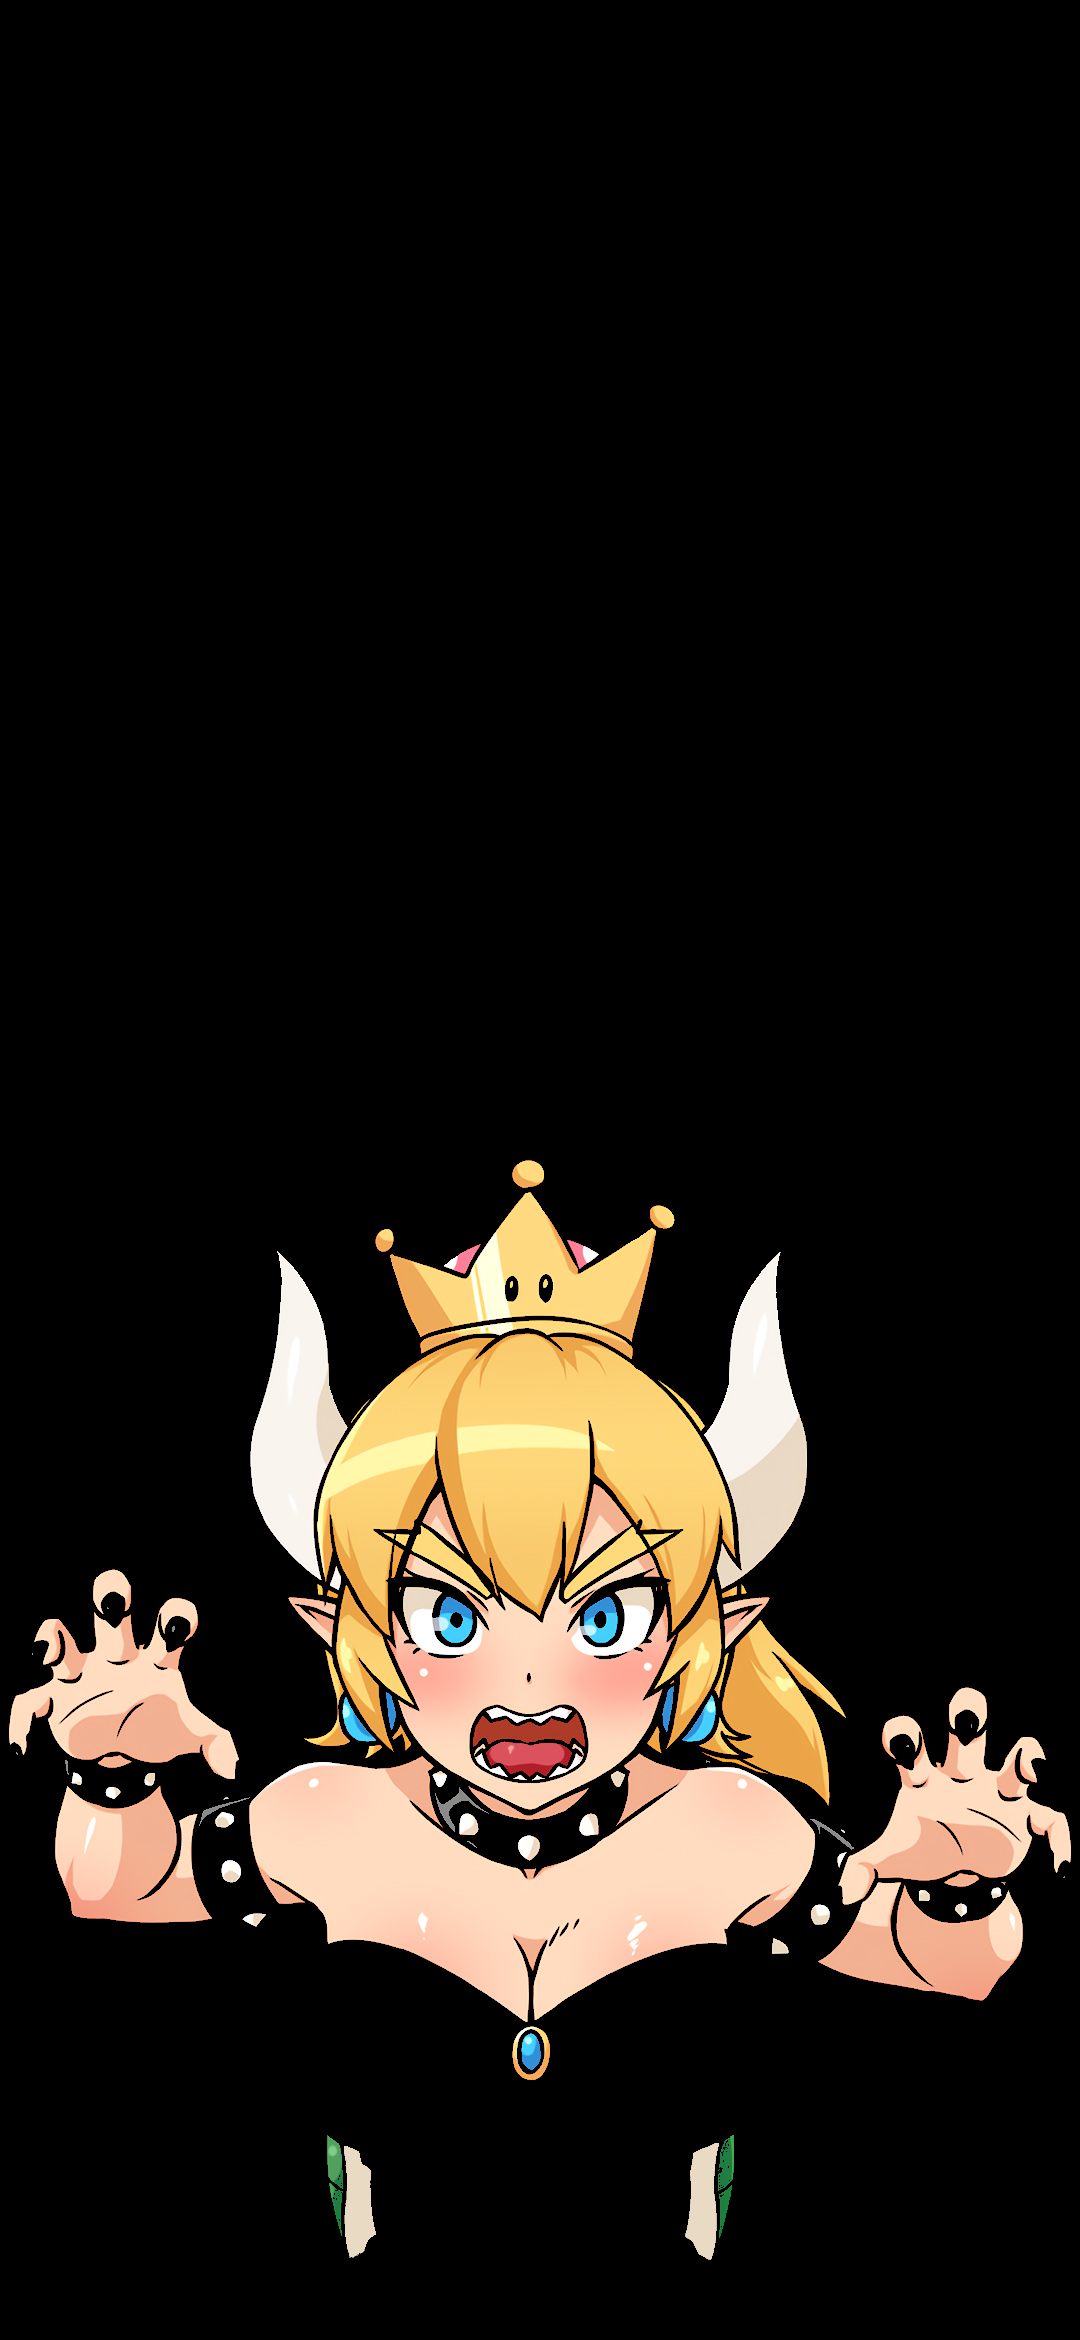 Bowsette Wallpapers posted by Ethan Peltier